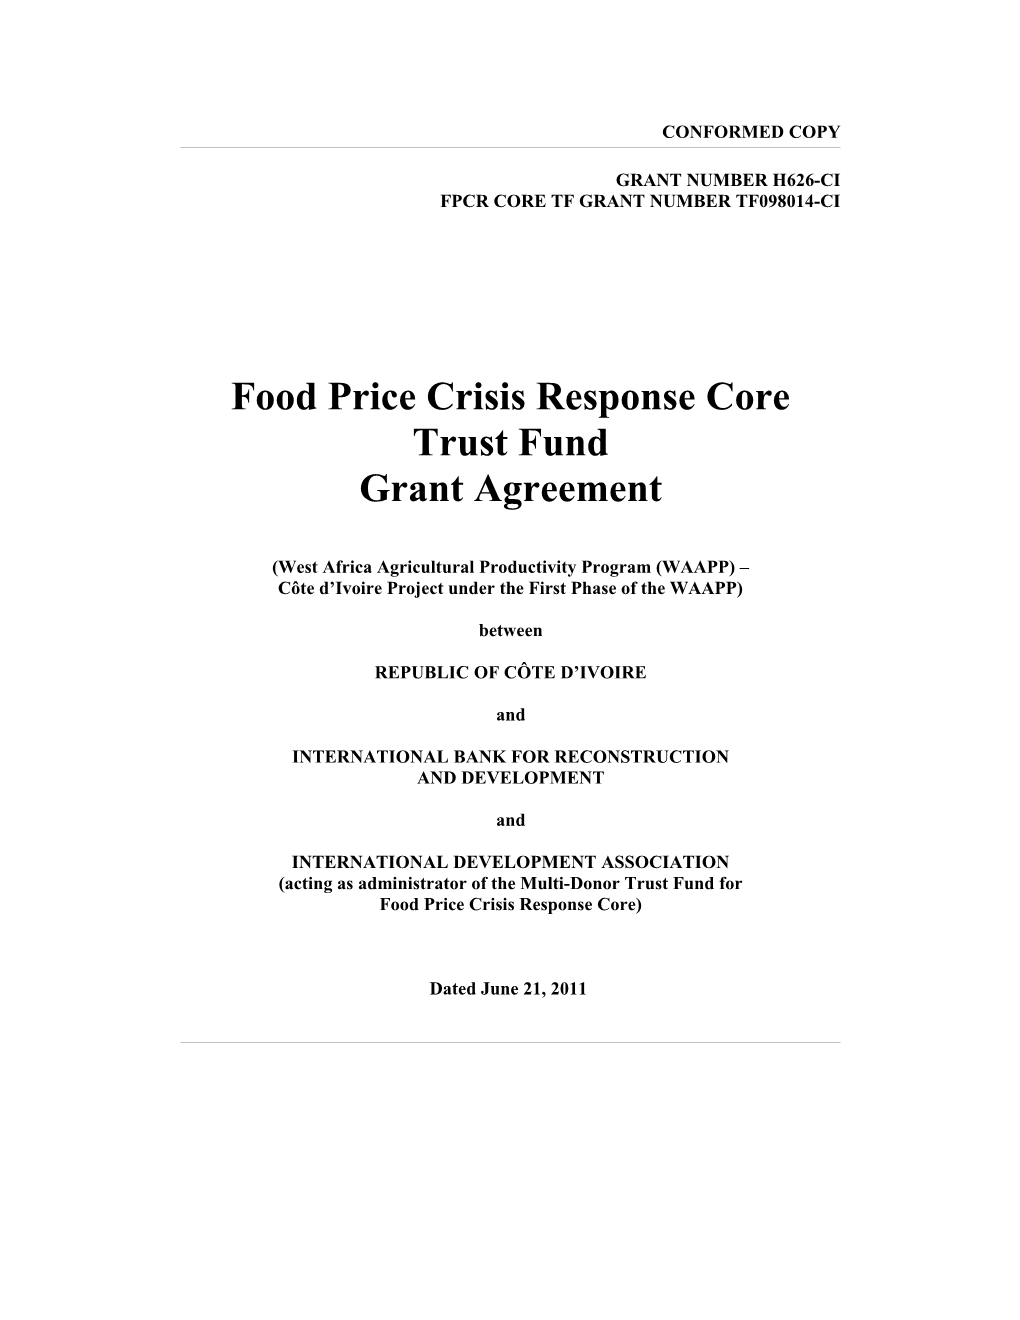 Fpcr Core Tf Grant Number Tf098014-Ci